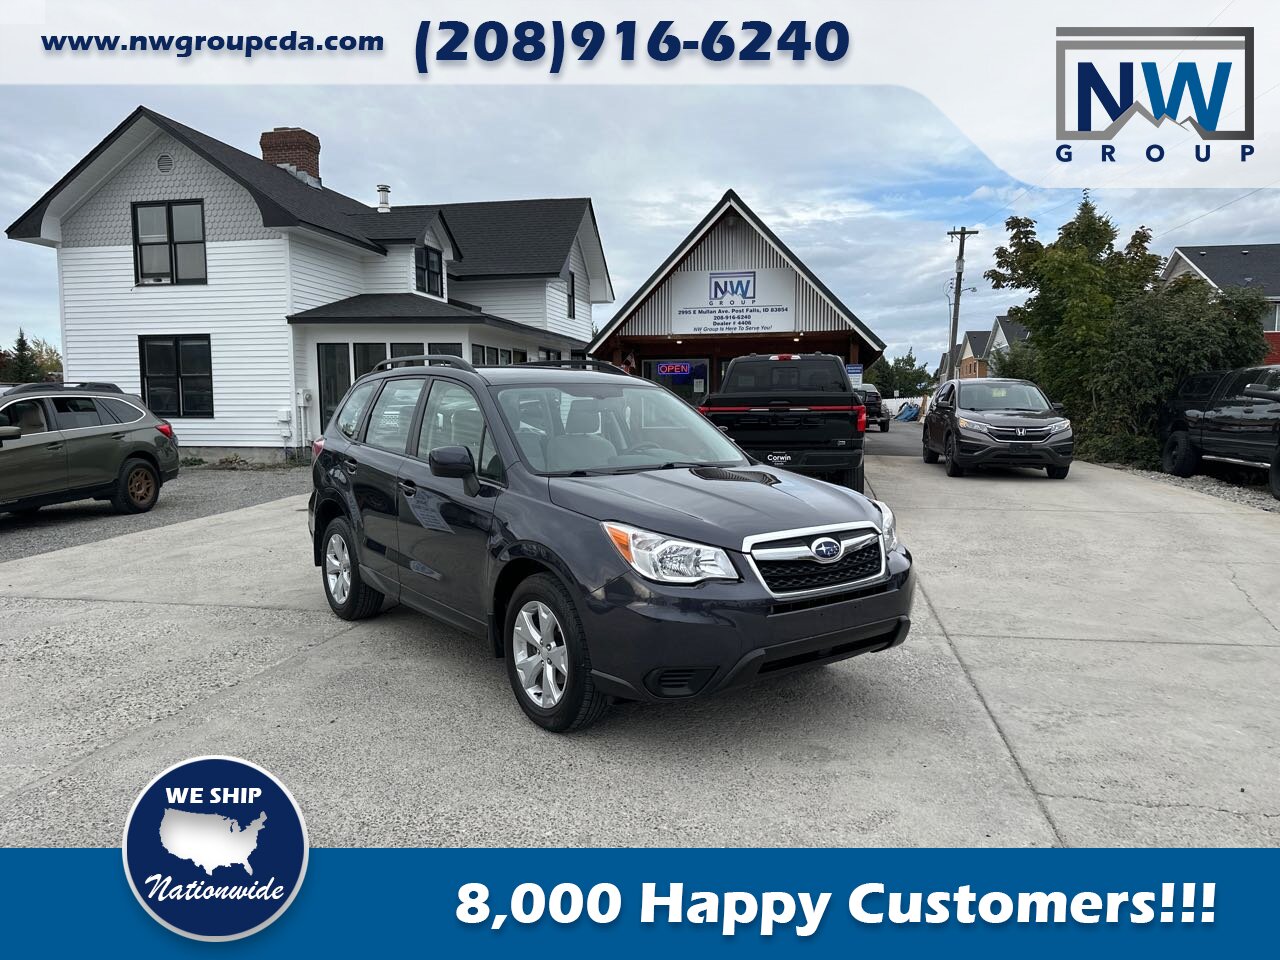 2015 Subaru Forester 2.5i, Low Miles, 45k  AWD, Alloy Wheels, Nice Color Combination! - Photo 1 - Post Falls, ID 83854